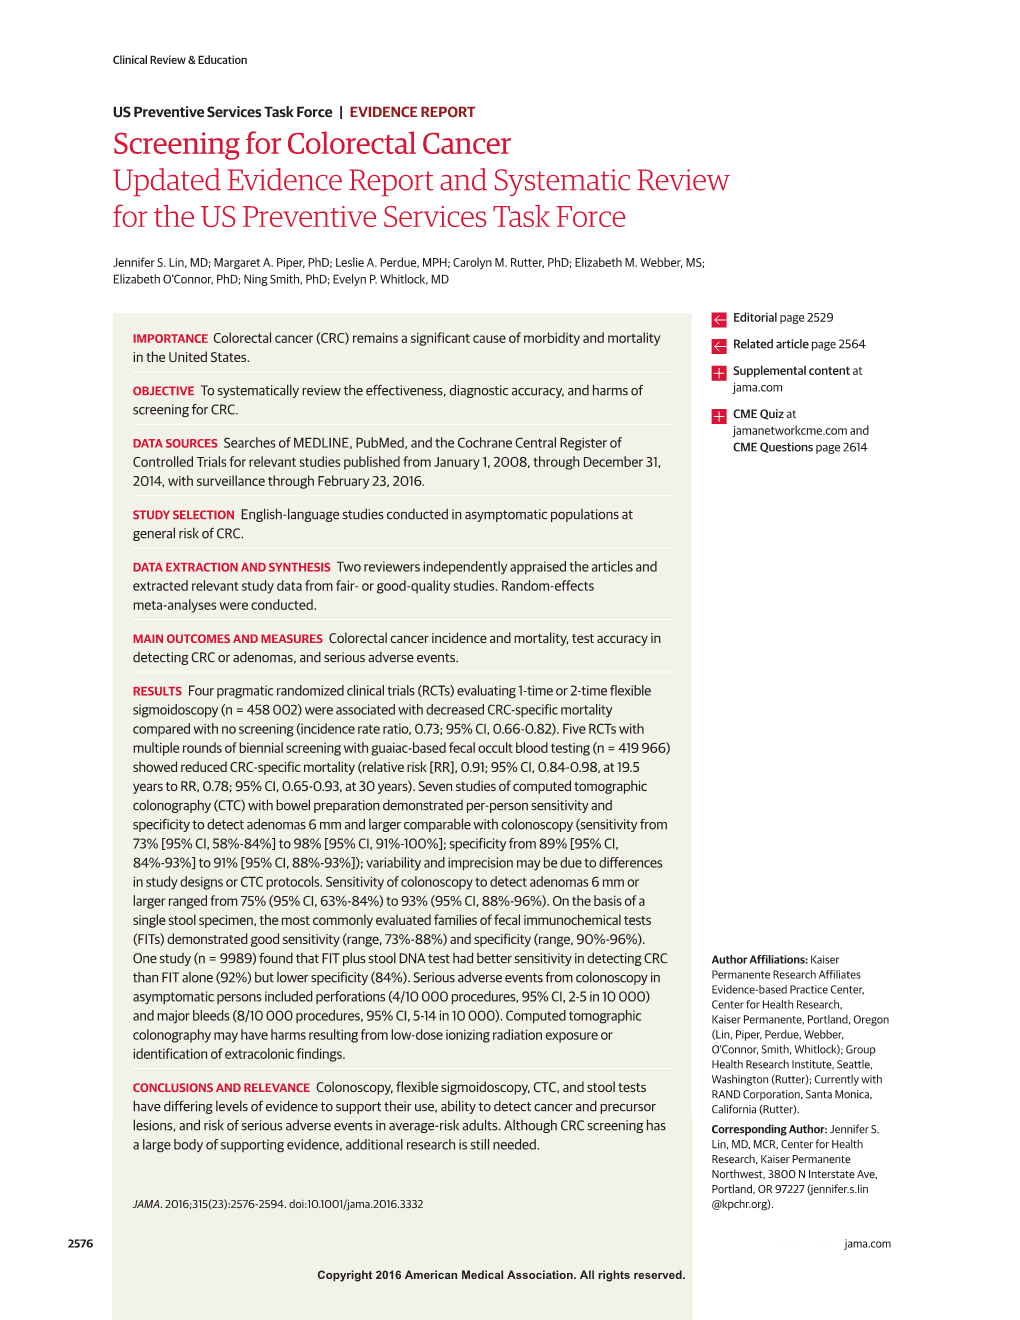 Screening for Colorectal Cancer Updated Evidence Report and Systematic Review for the US Preventive Services Task Force